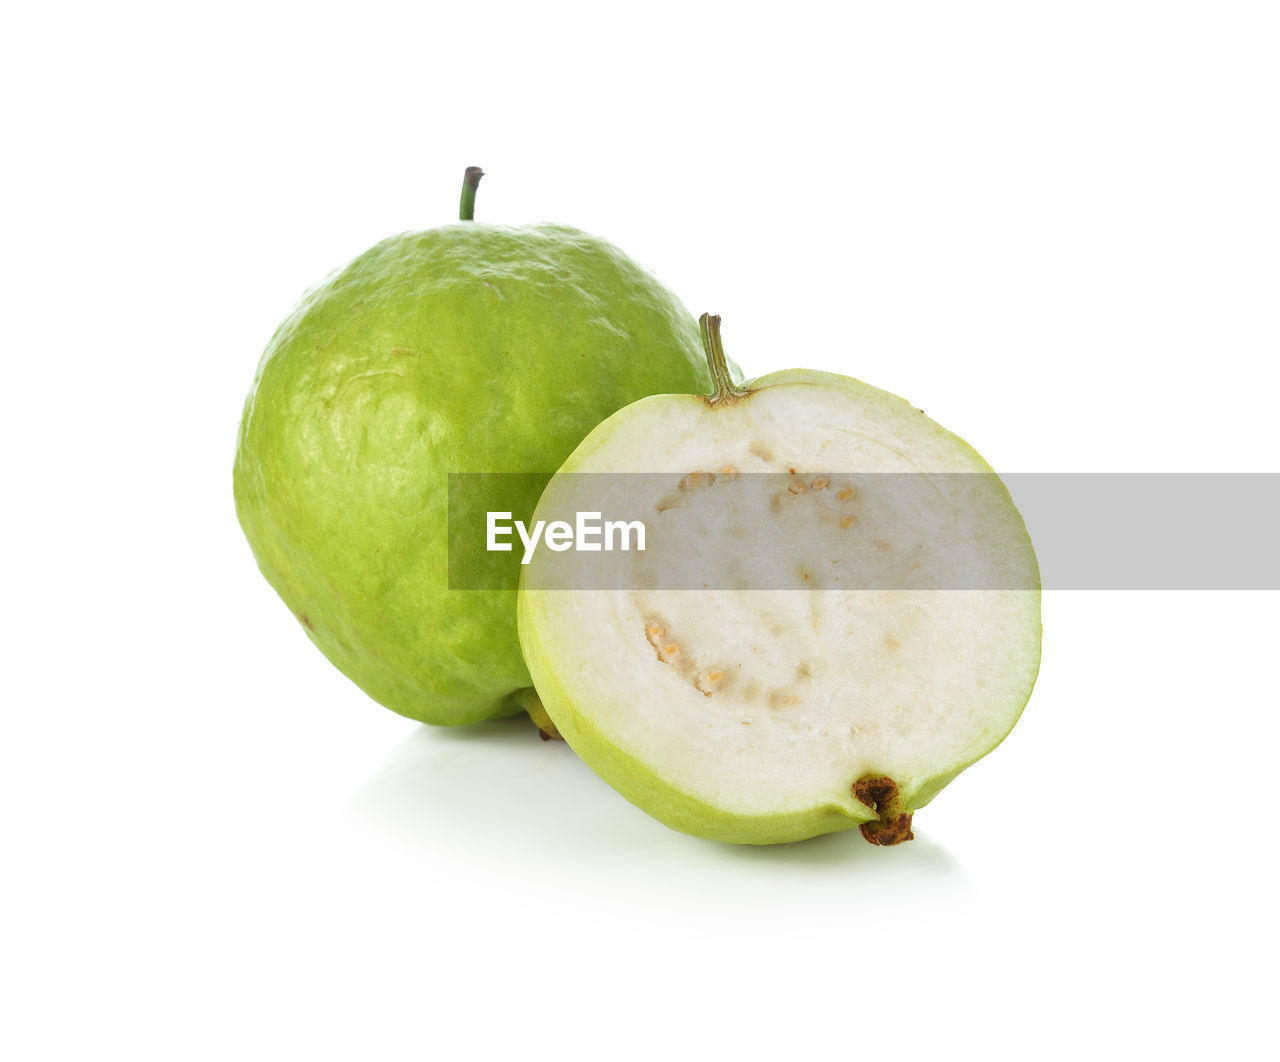 CLOSE-UP OF FRESH GREEN APPLE AGAINST WHITE BACKGROUND